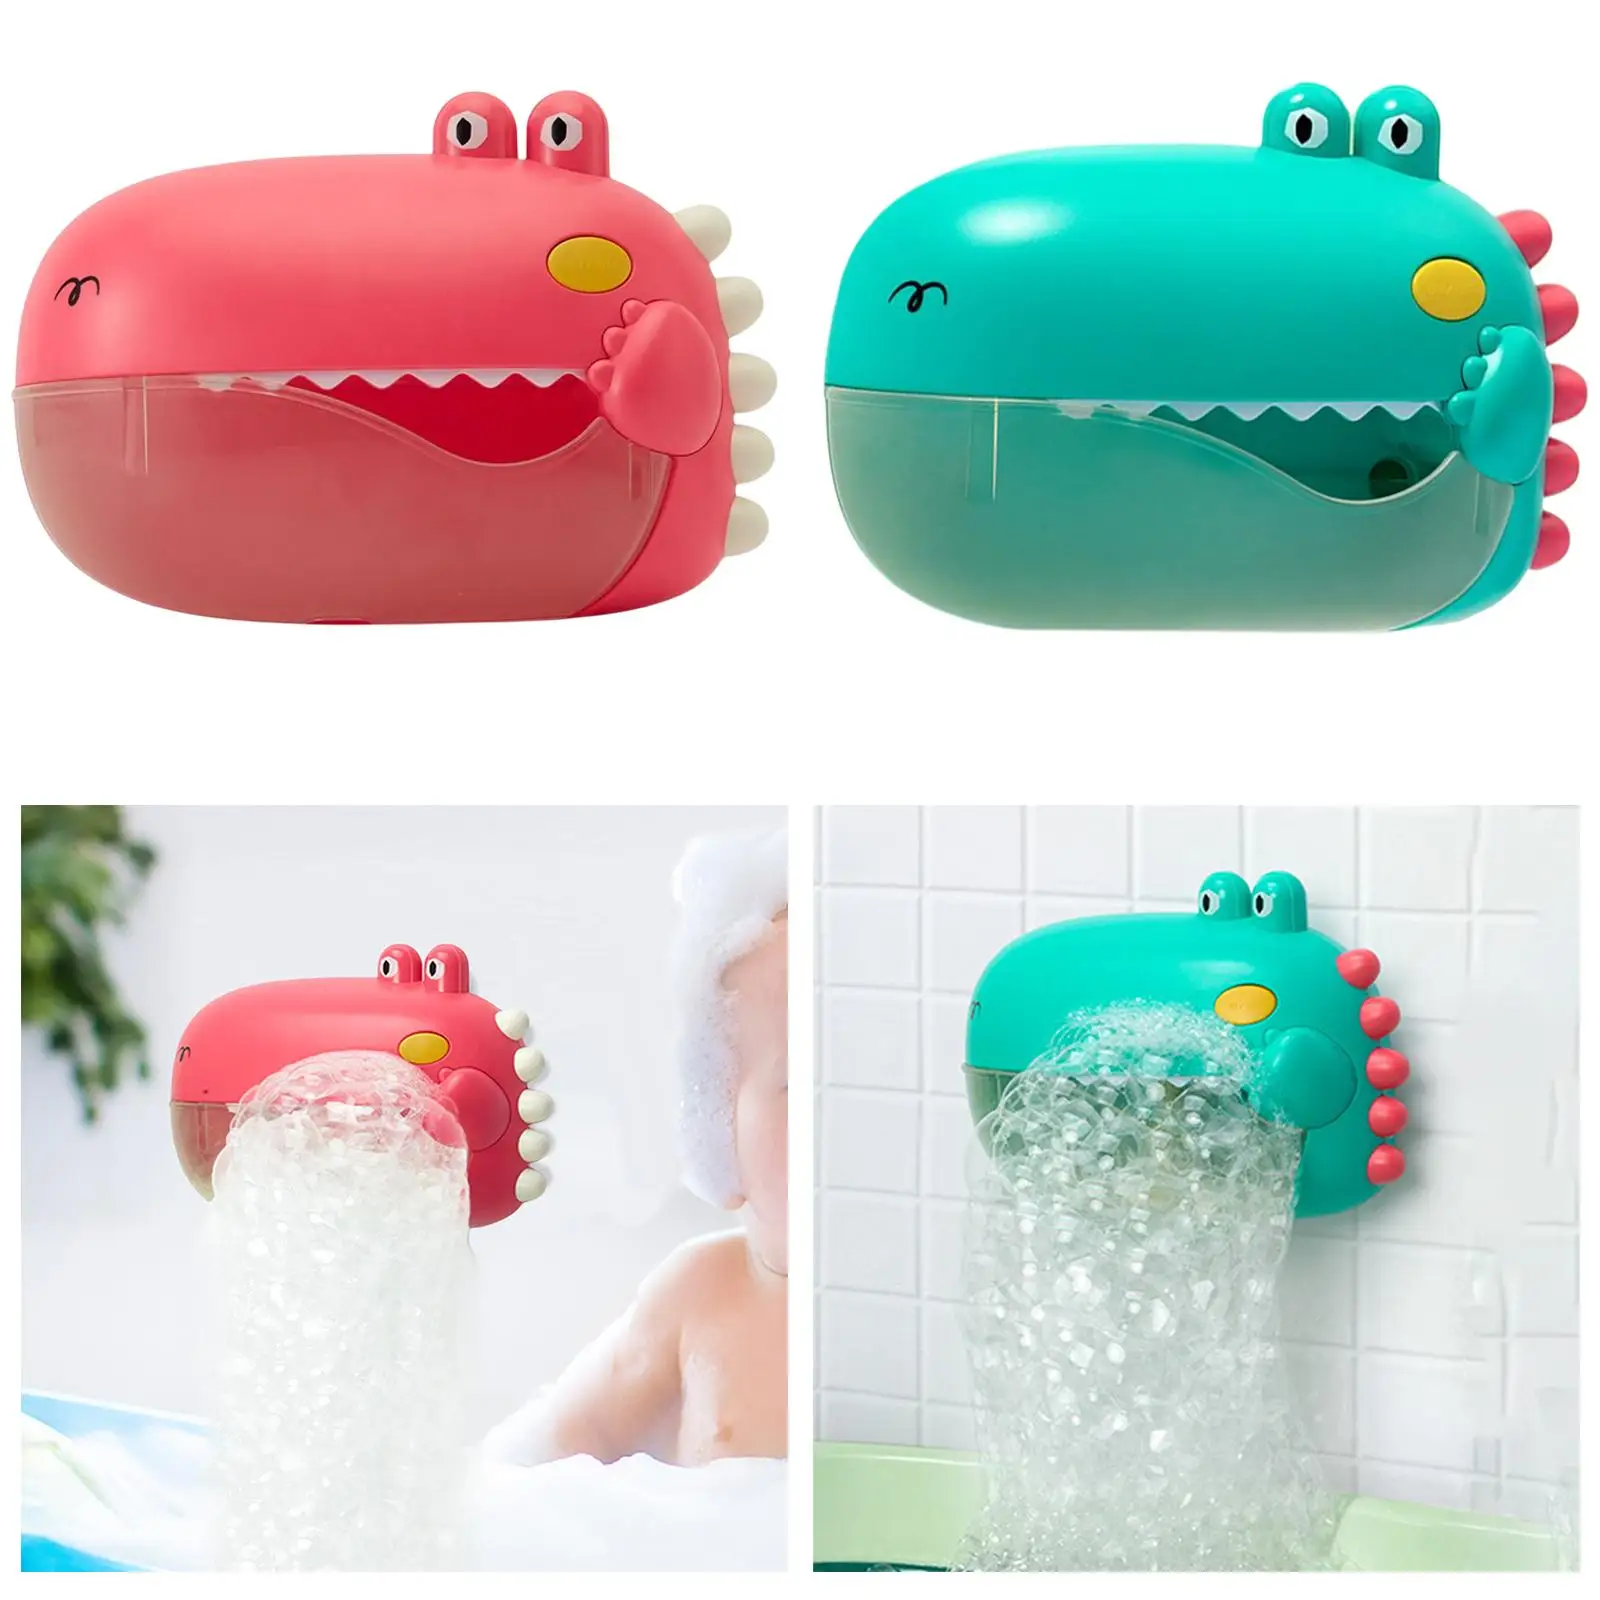 Dinosaur Bubble Maker Machine Dinosaur Toy Water Game for Birthday Gifts